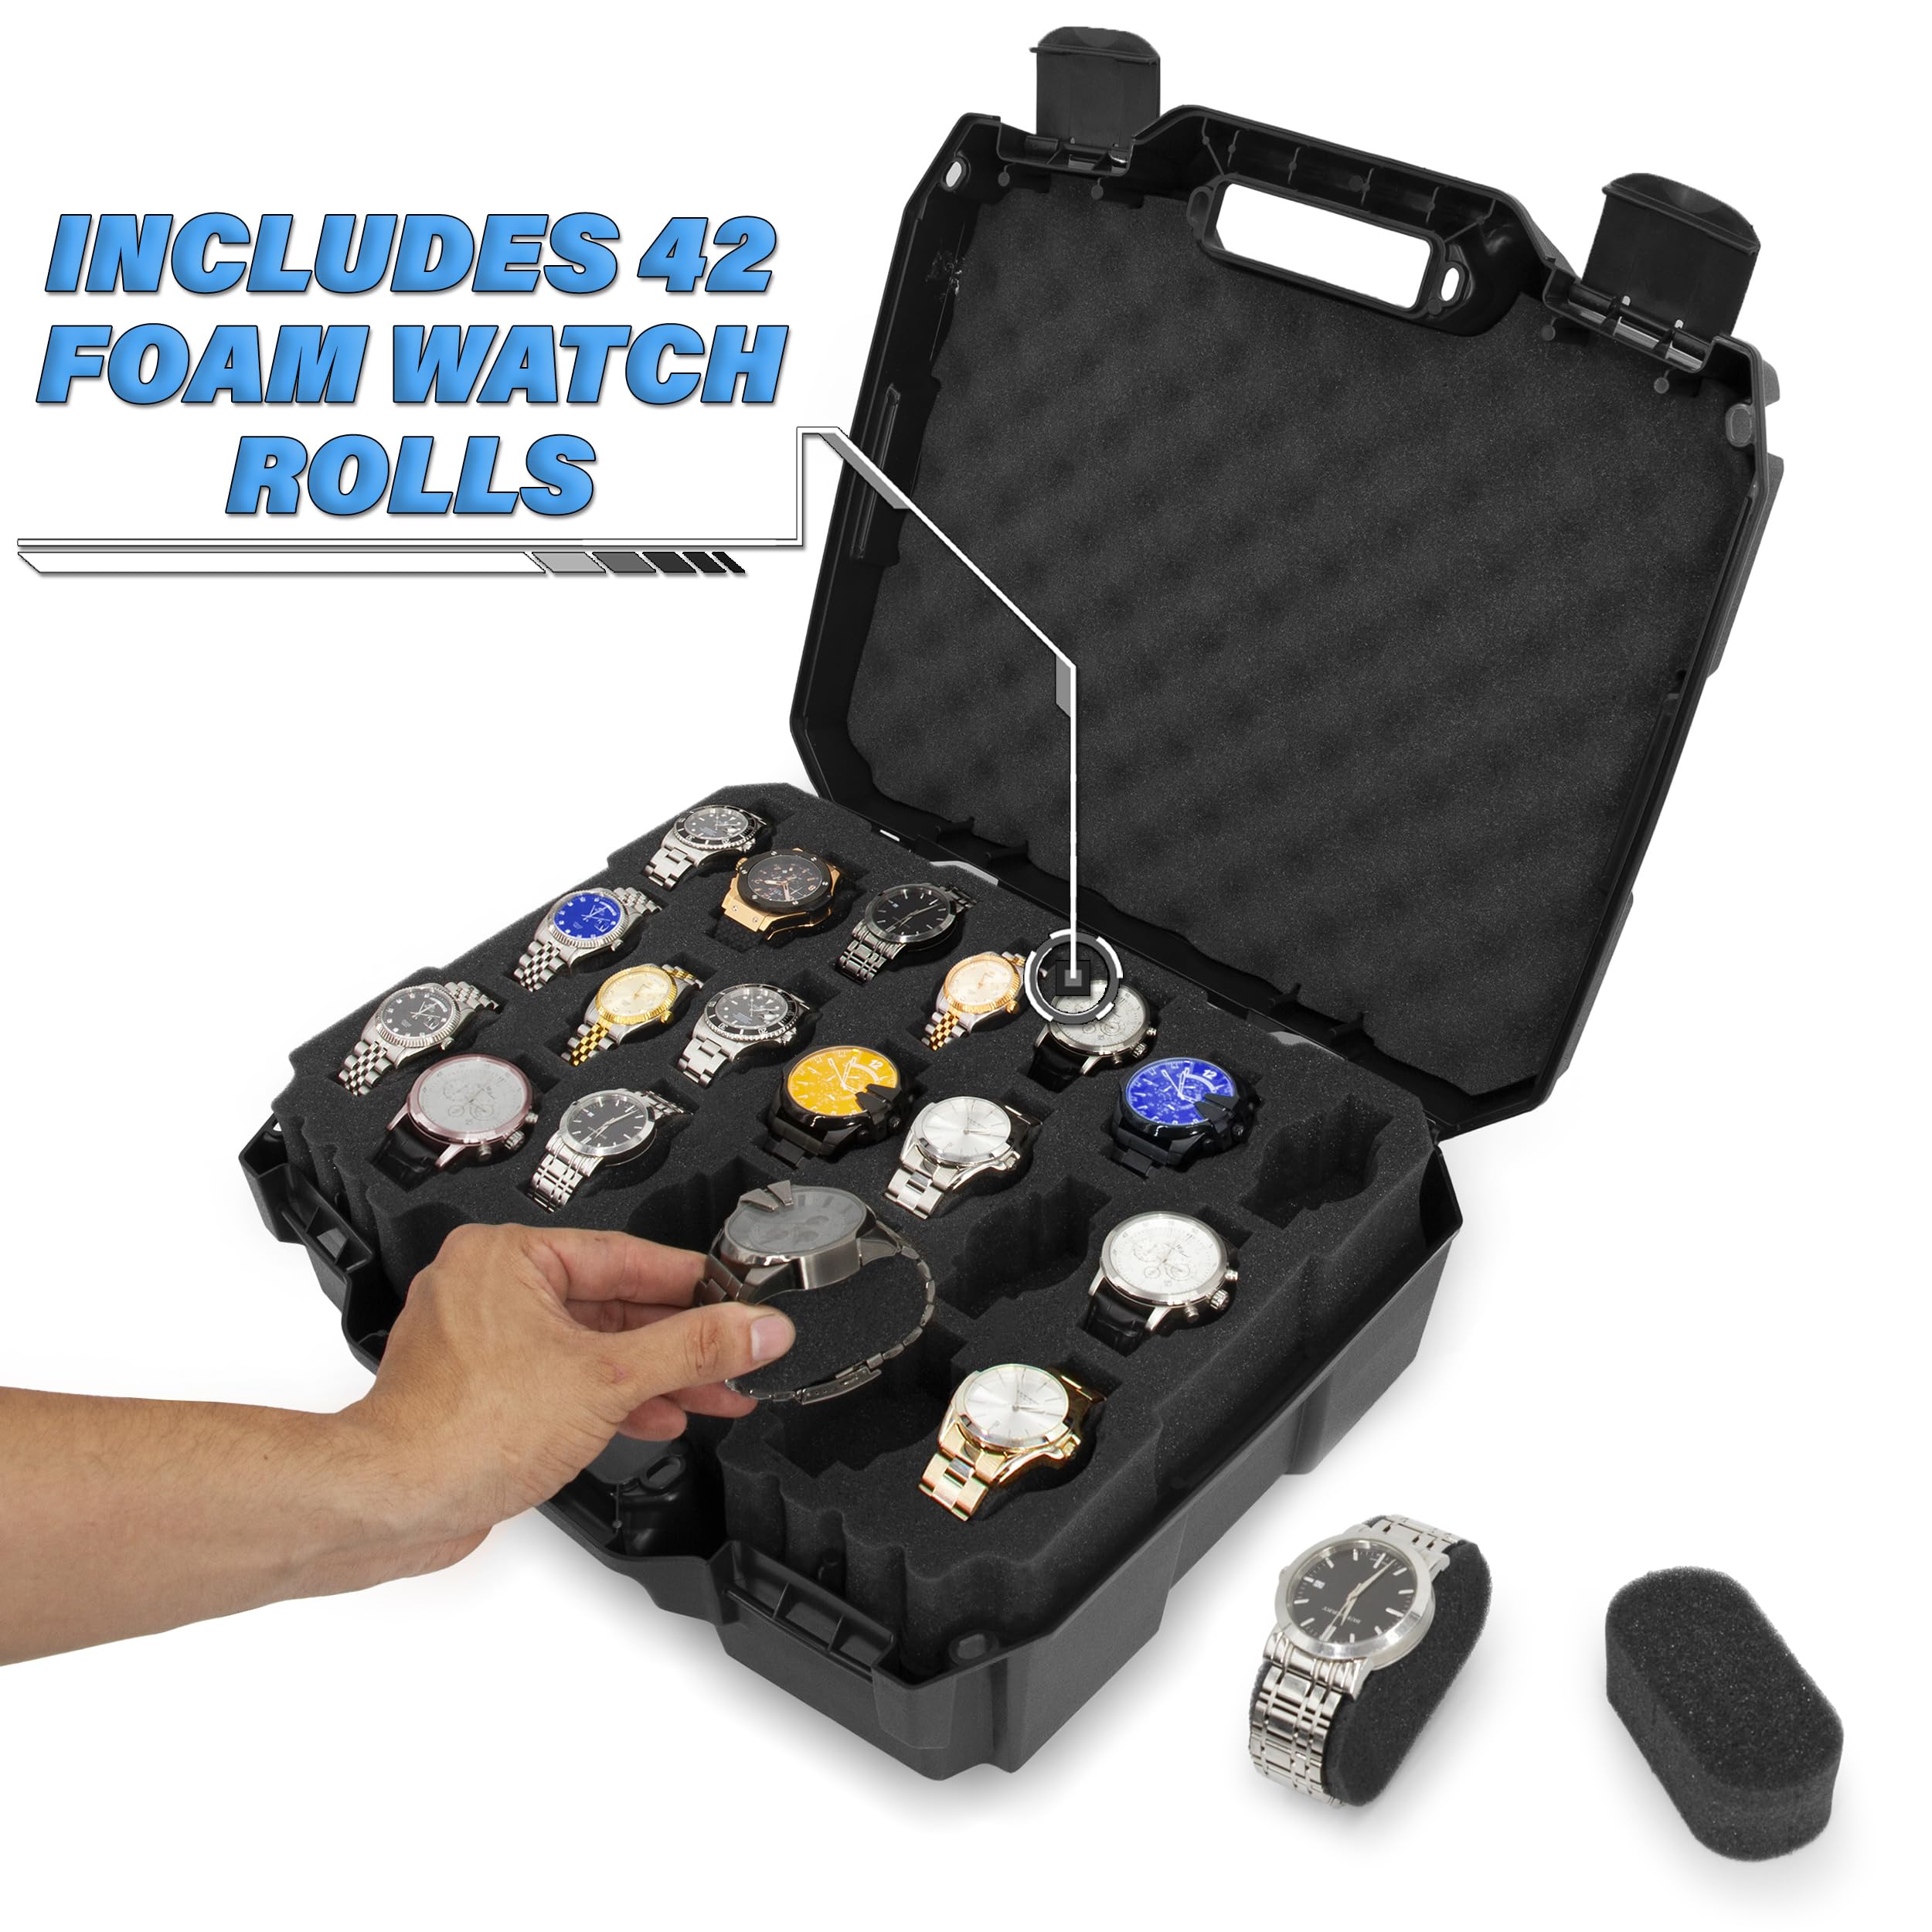 CASEMATIX Watch Travel Case With 42 Watch Roll Holder Slots- Impact Resistant Watch Case With Foam Watch Box Interior and Two Removable Display Trays, Watch Storage Fits 24mm to 56mm Faces